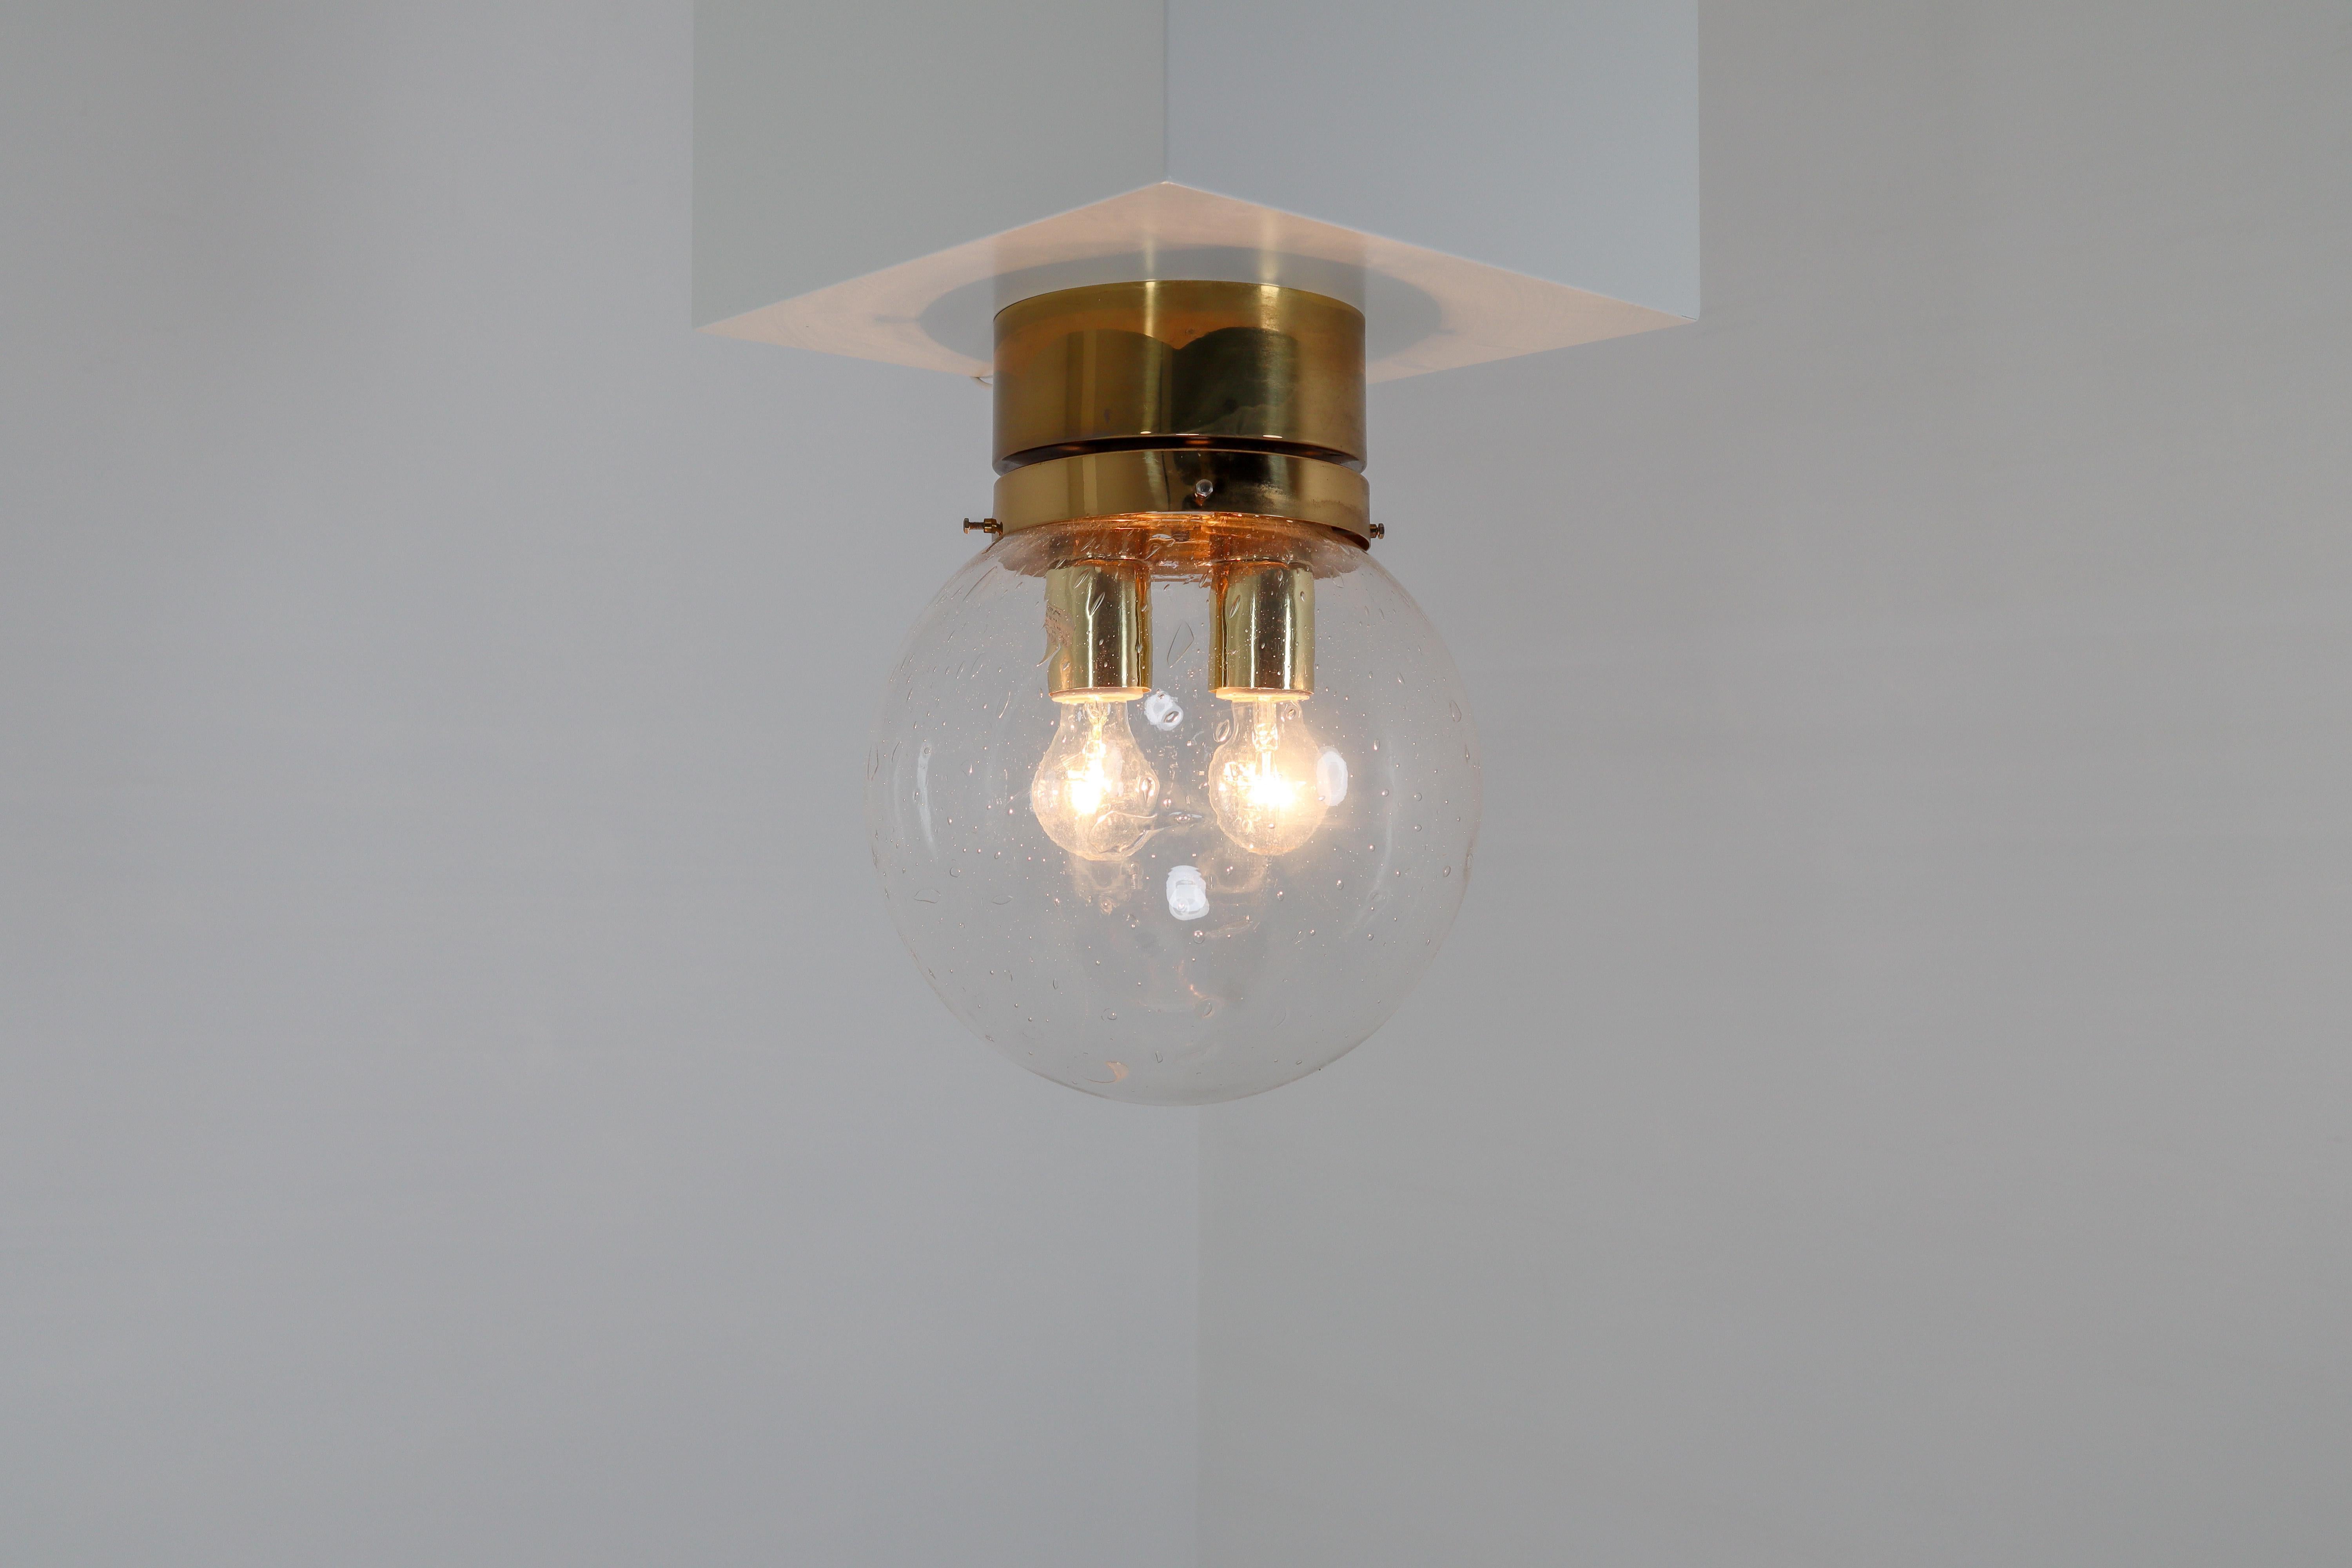 European Midcentury Ceiling Light with Brass Frame and Large Hand Blown Glass Globe 1960s For Sale